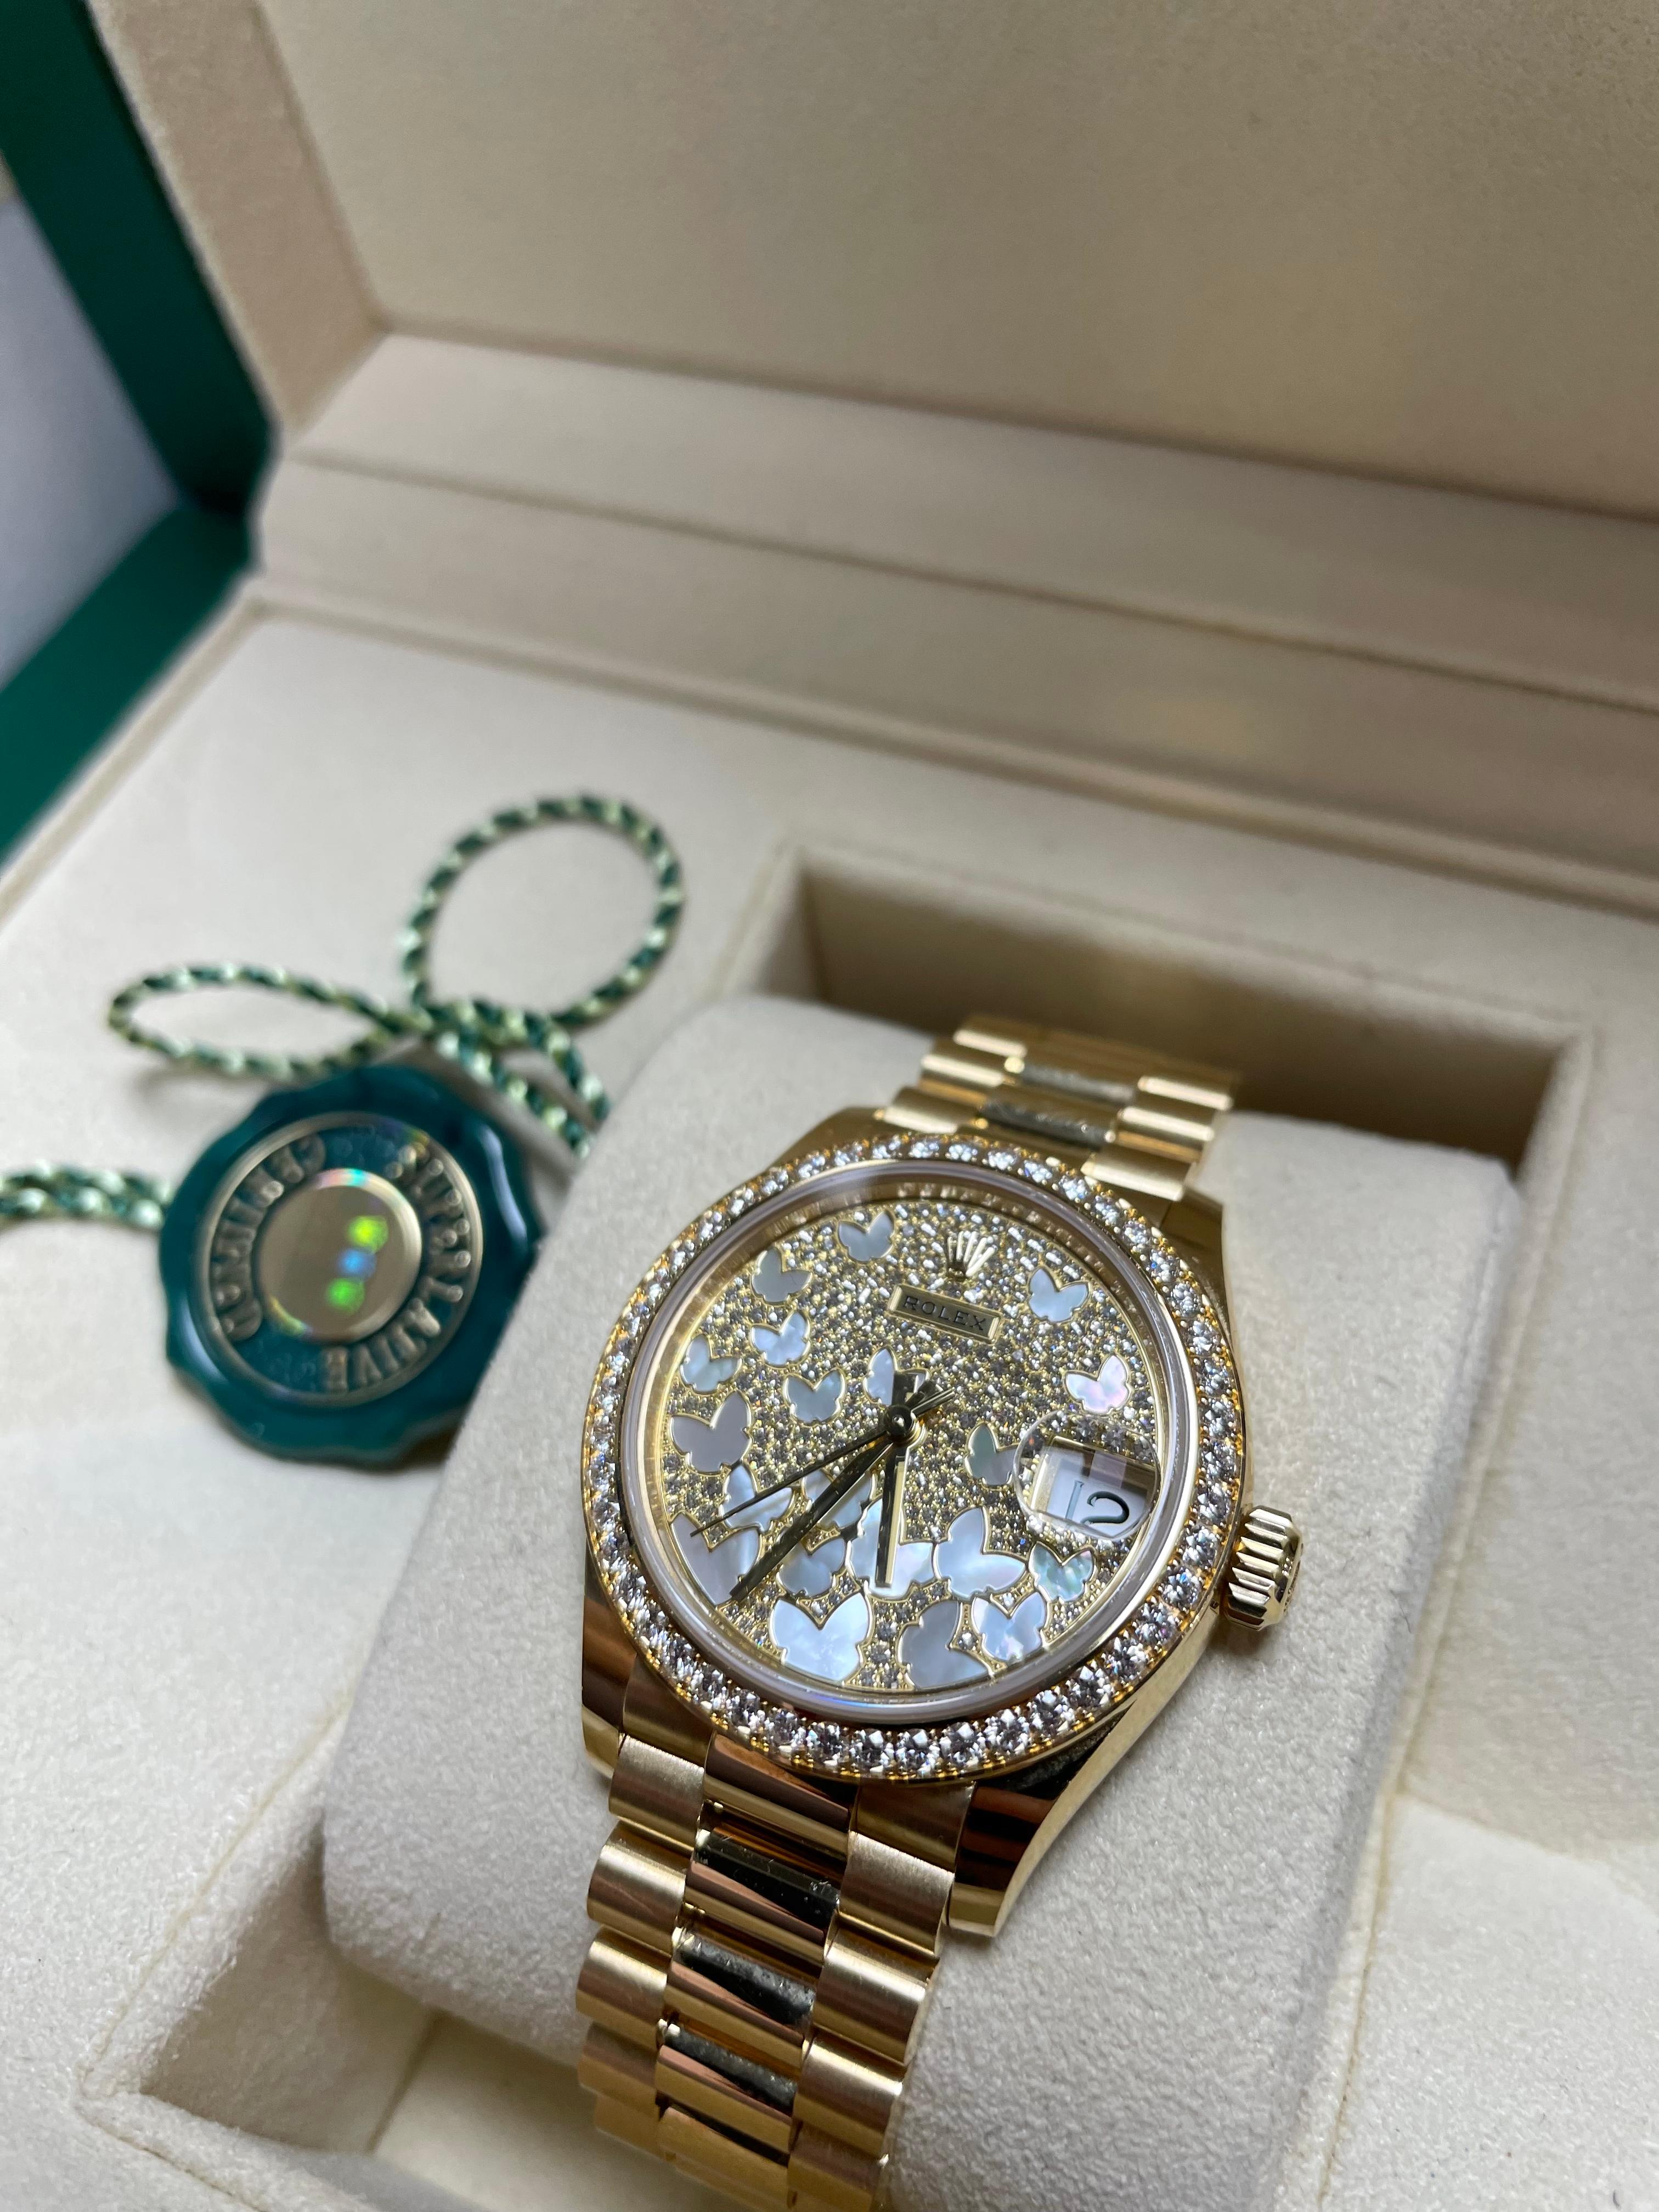 RARE Rolex Datejust watch size 31mm. 18kt Yellow Gold Case, Bezel Set With 46 Diamonds. Diamond Paved Mother-Of-Pearl Butterfly Dial. 18K yellow gold President bracelet with semi-circular three-piece links, concealed folding Crownclasp buckle.